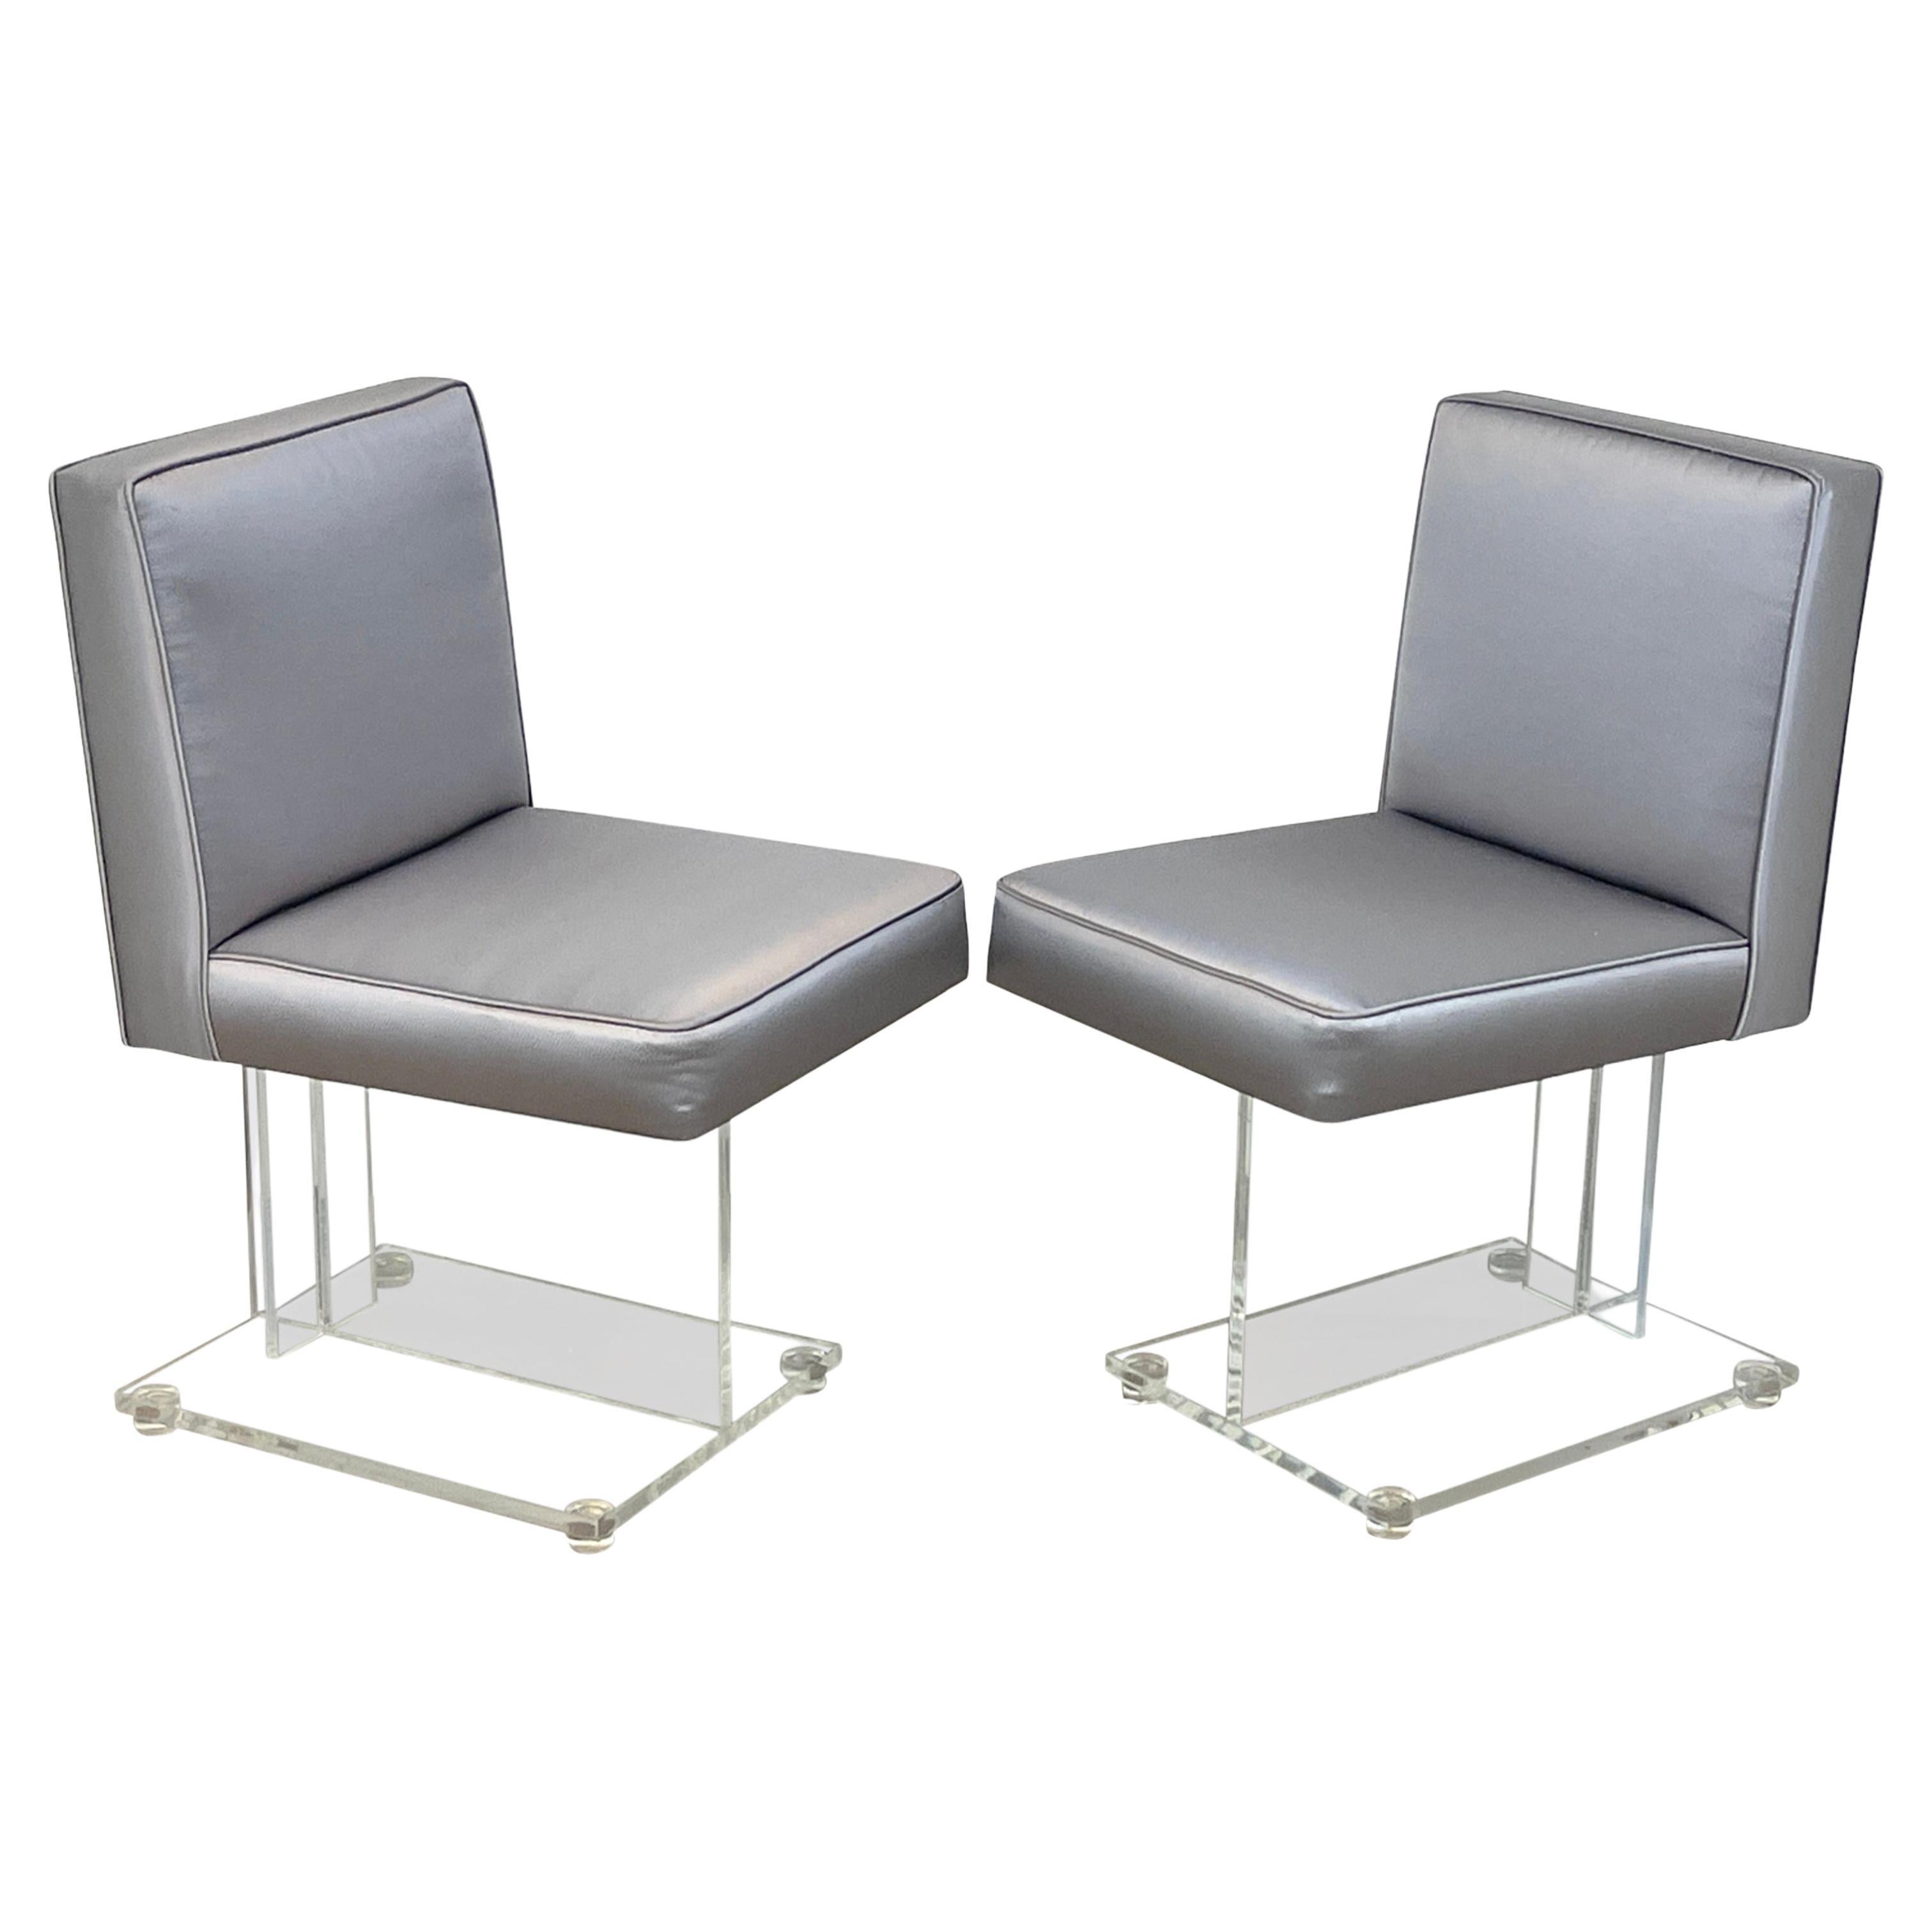 Pair of 1970s Diminutive Sculptural Lucite Chairs 